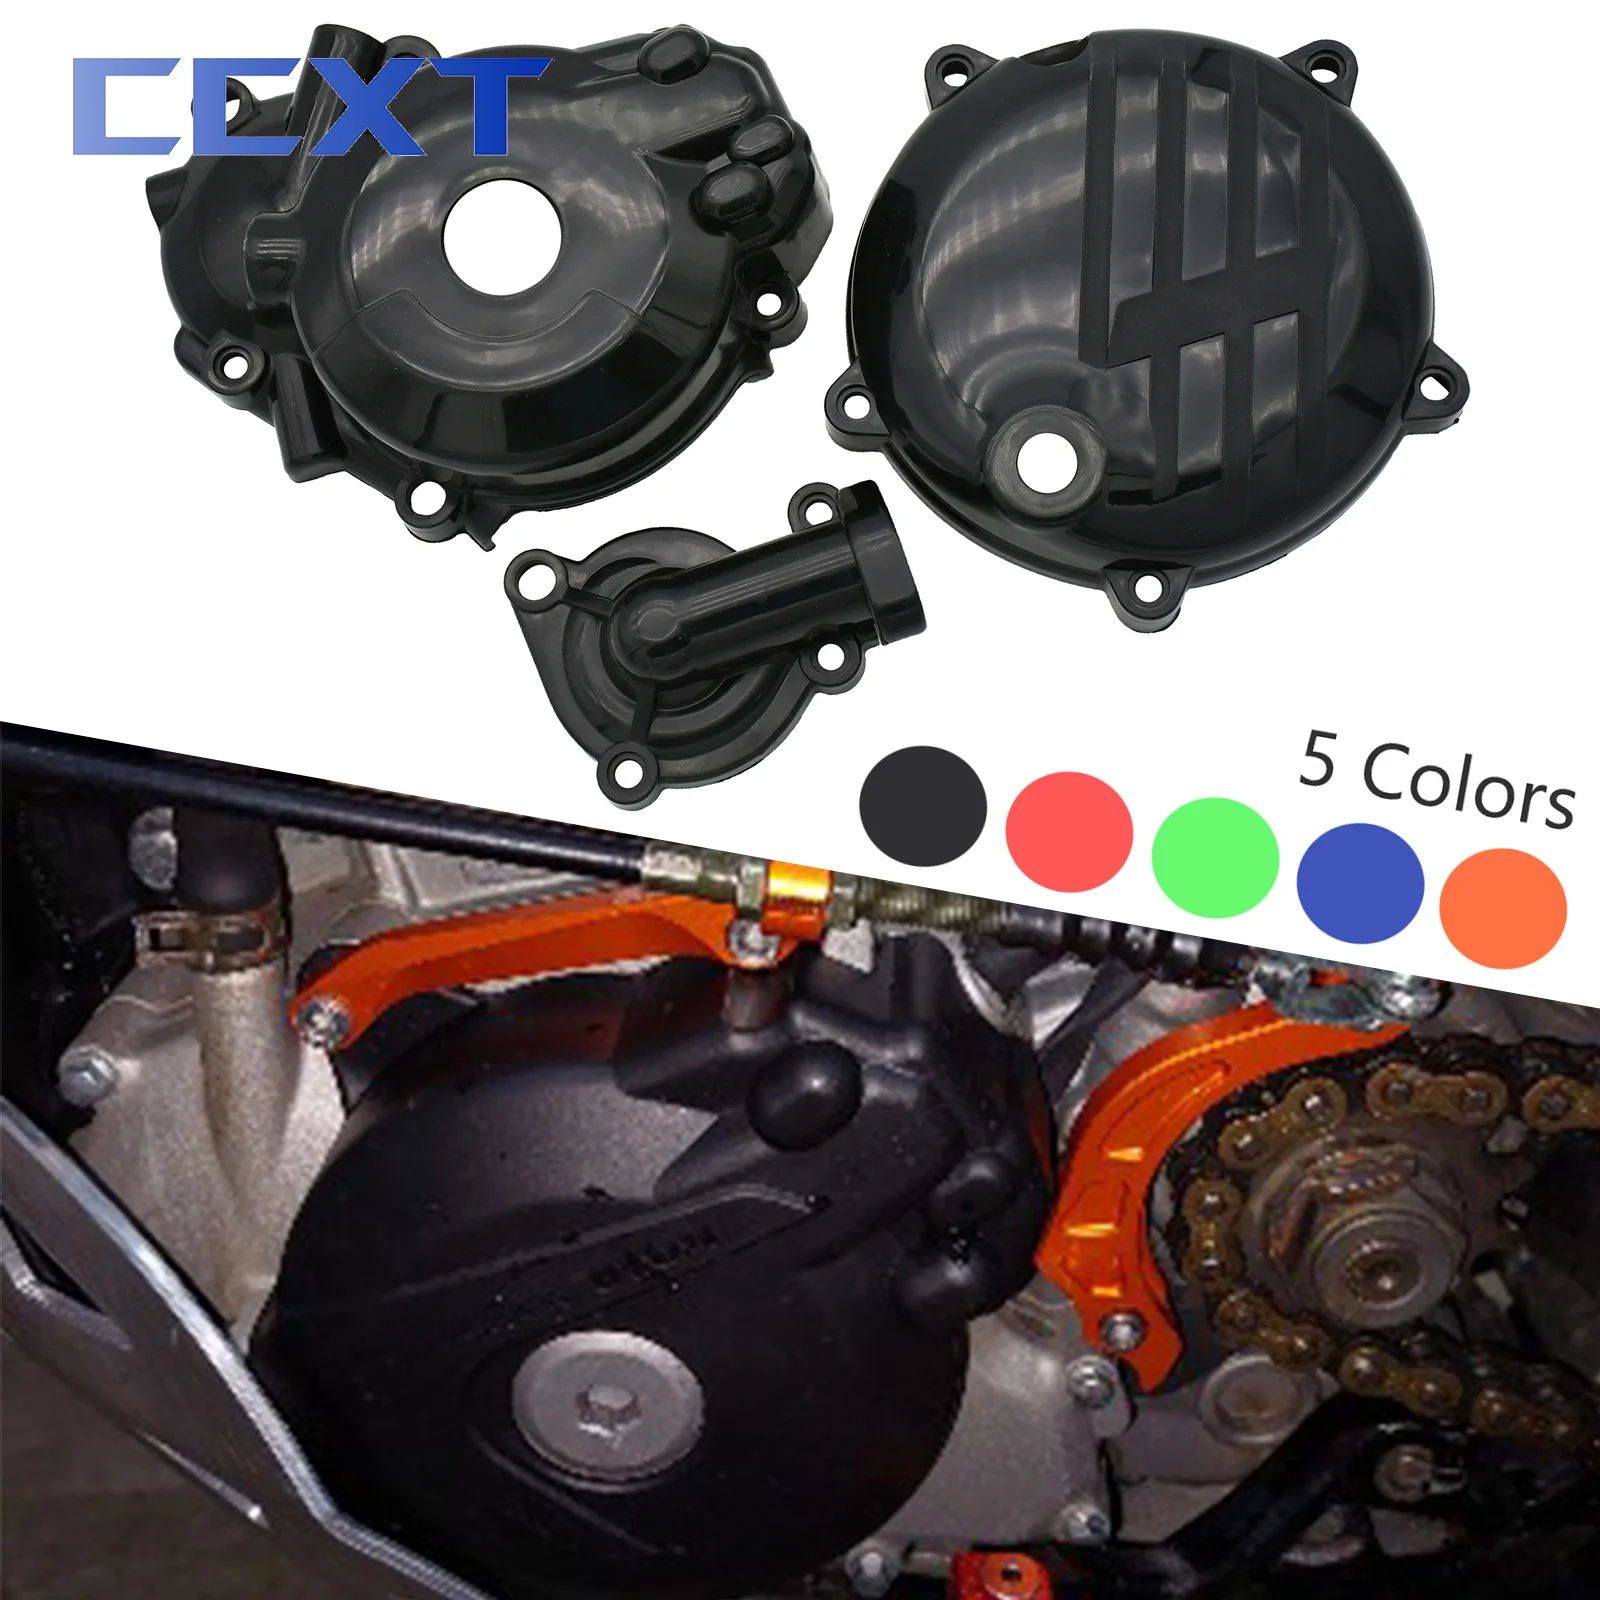 

Engine Ignition Protection Clutch Guard Protector Water Pump Cover For T6 K6 BSE Zongshen NC250 Motorcycle Dirt Bike Universal